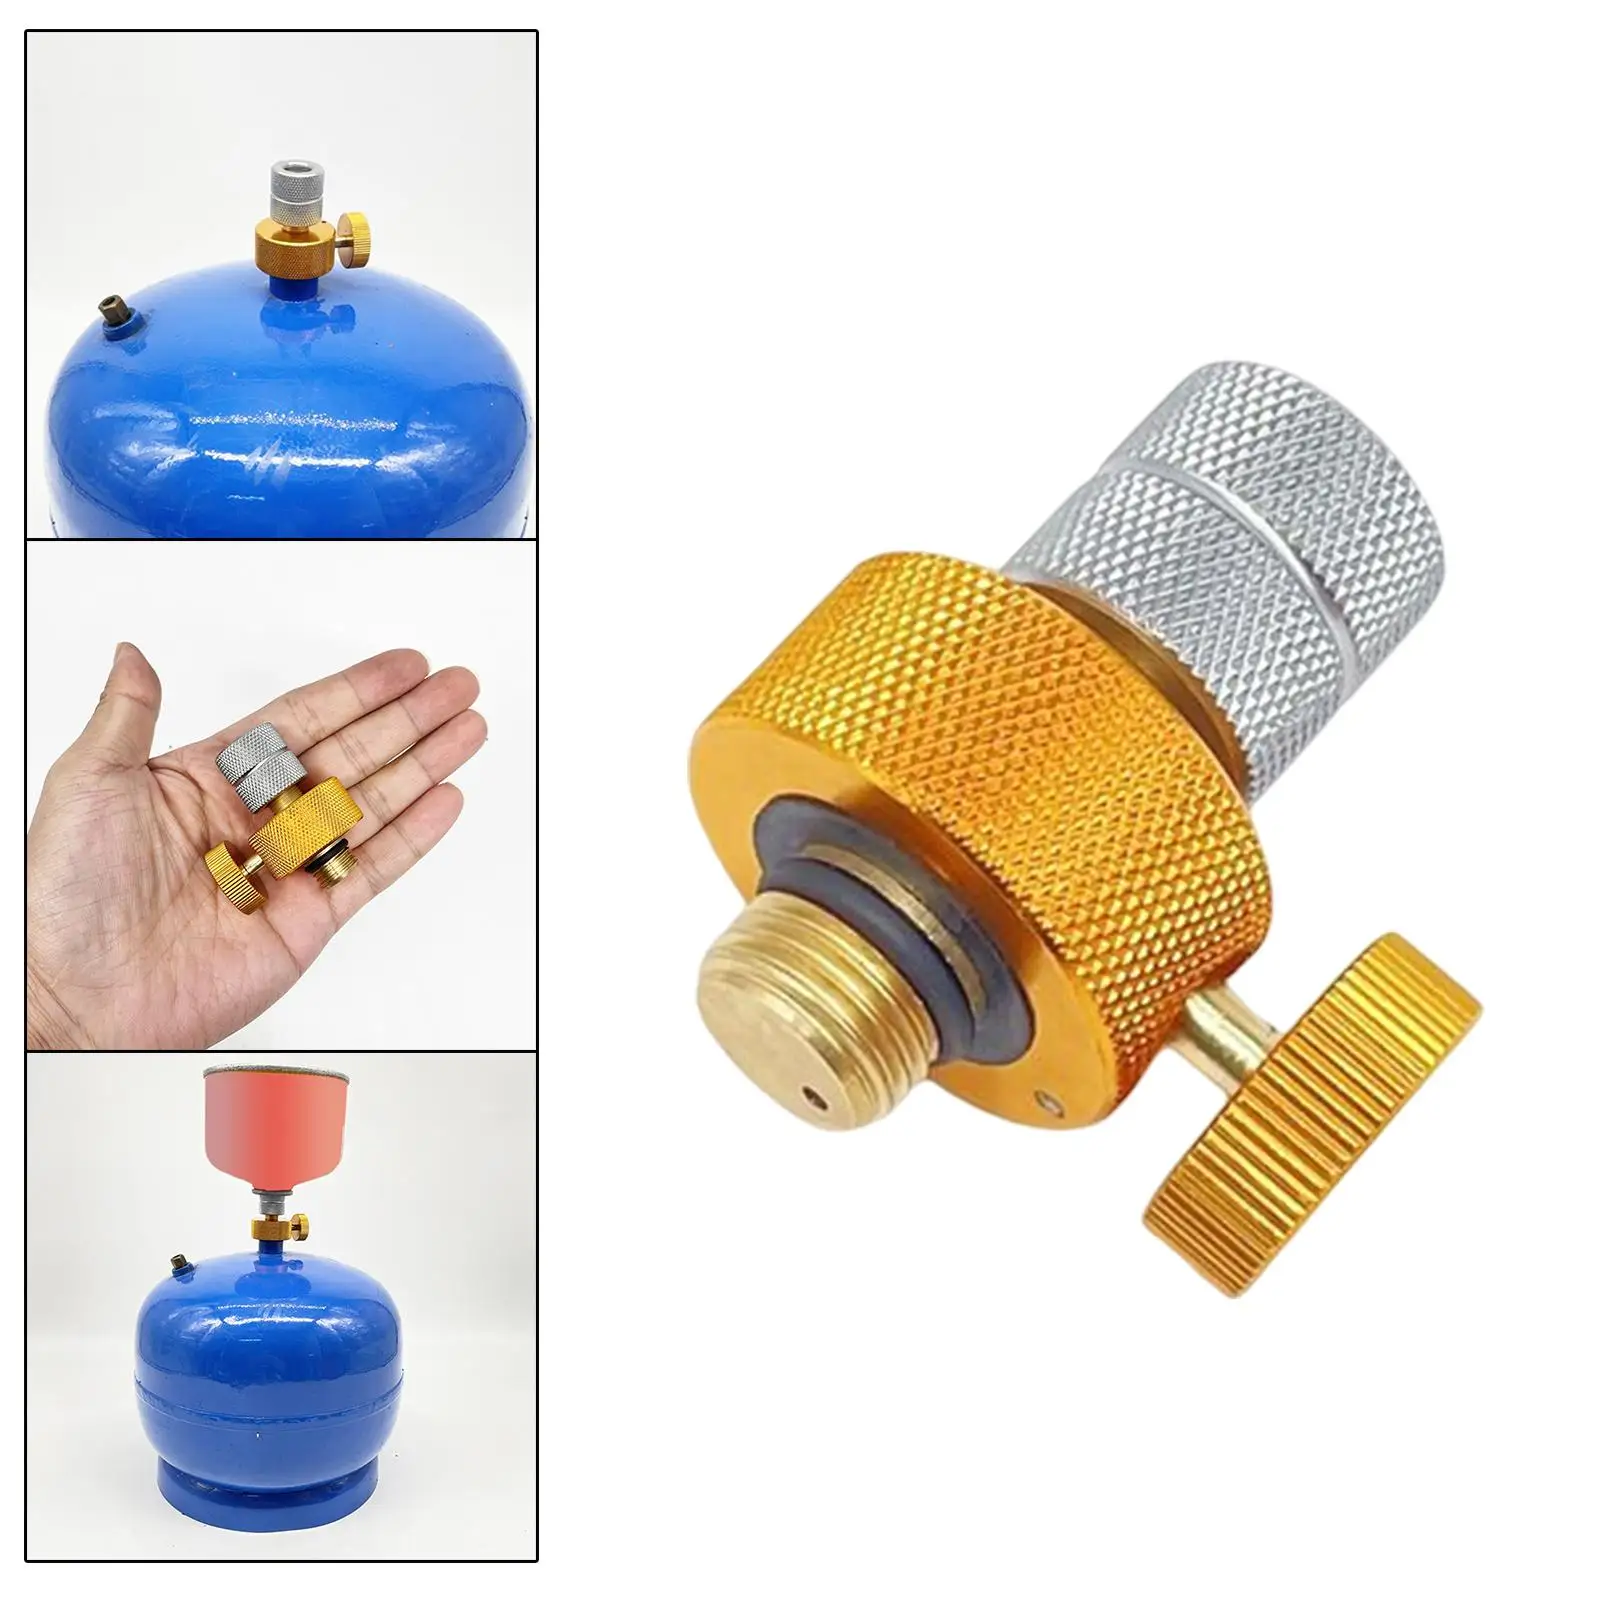 Adaptor Conversion, Furnace Connector, Cylinder Tank Split Type, for Camping Hiking